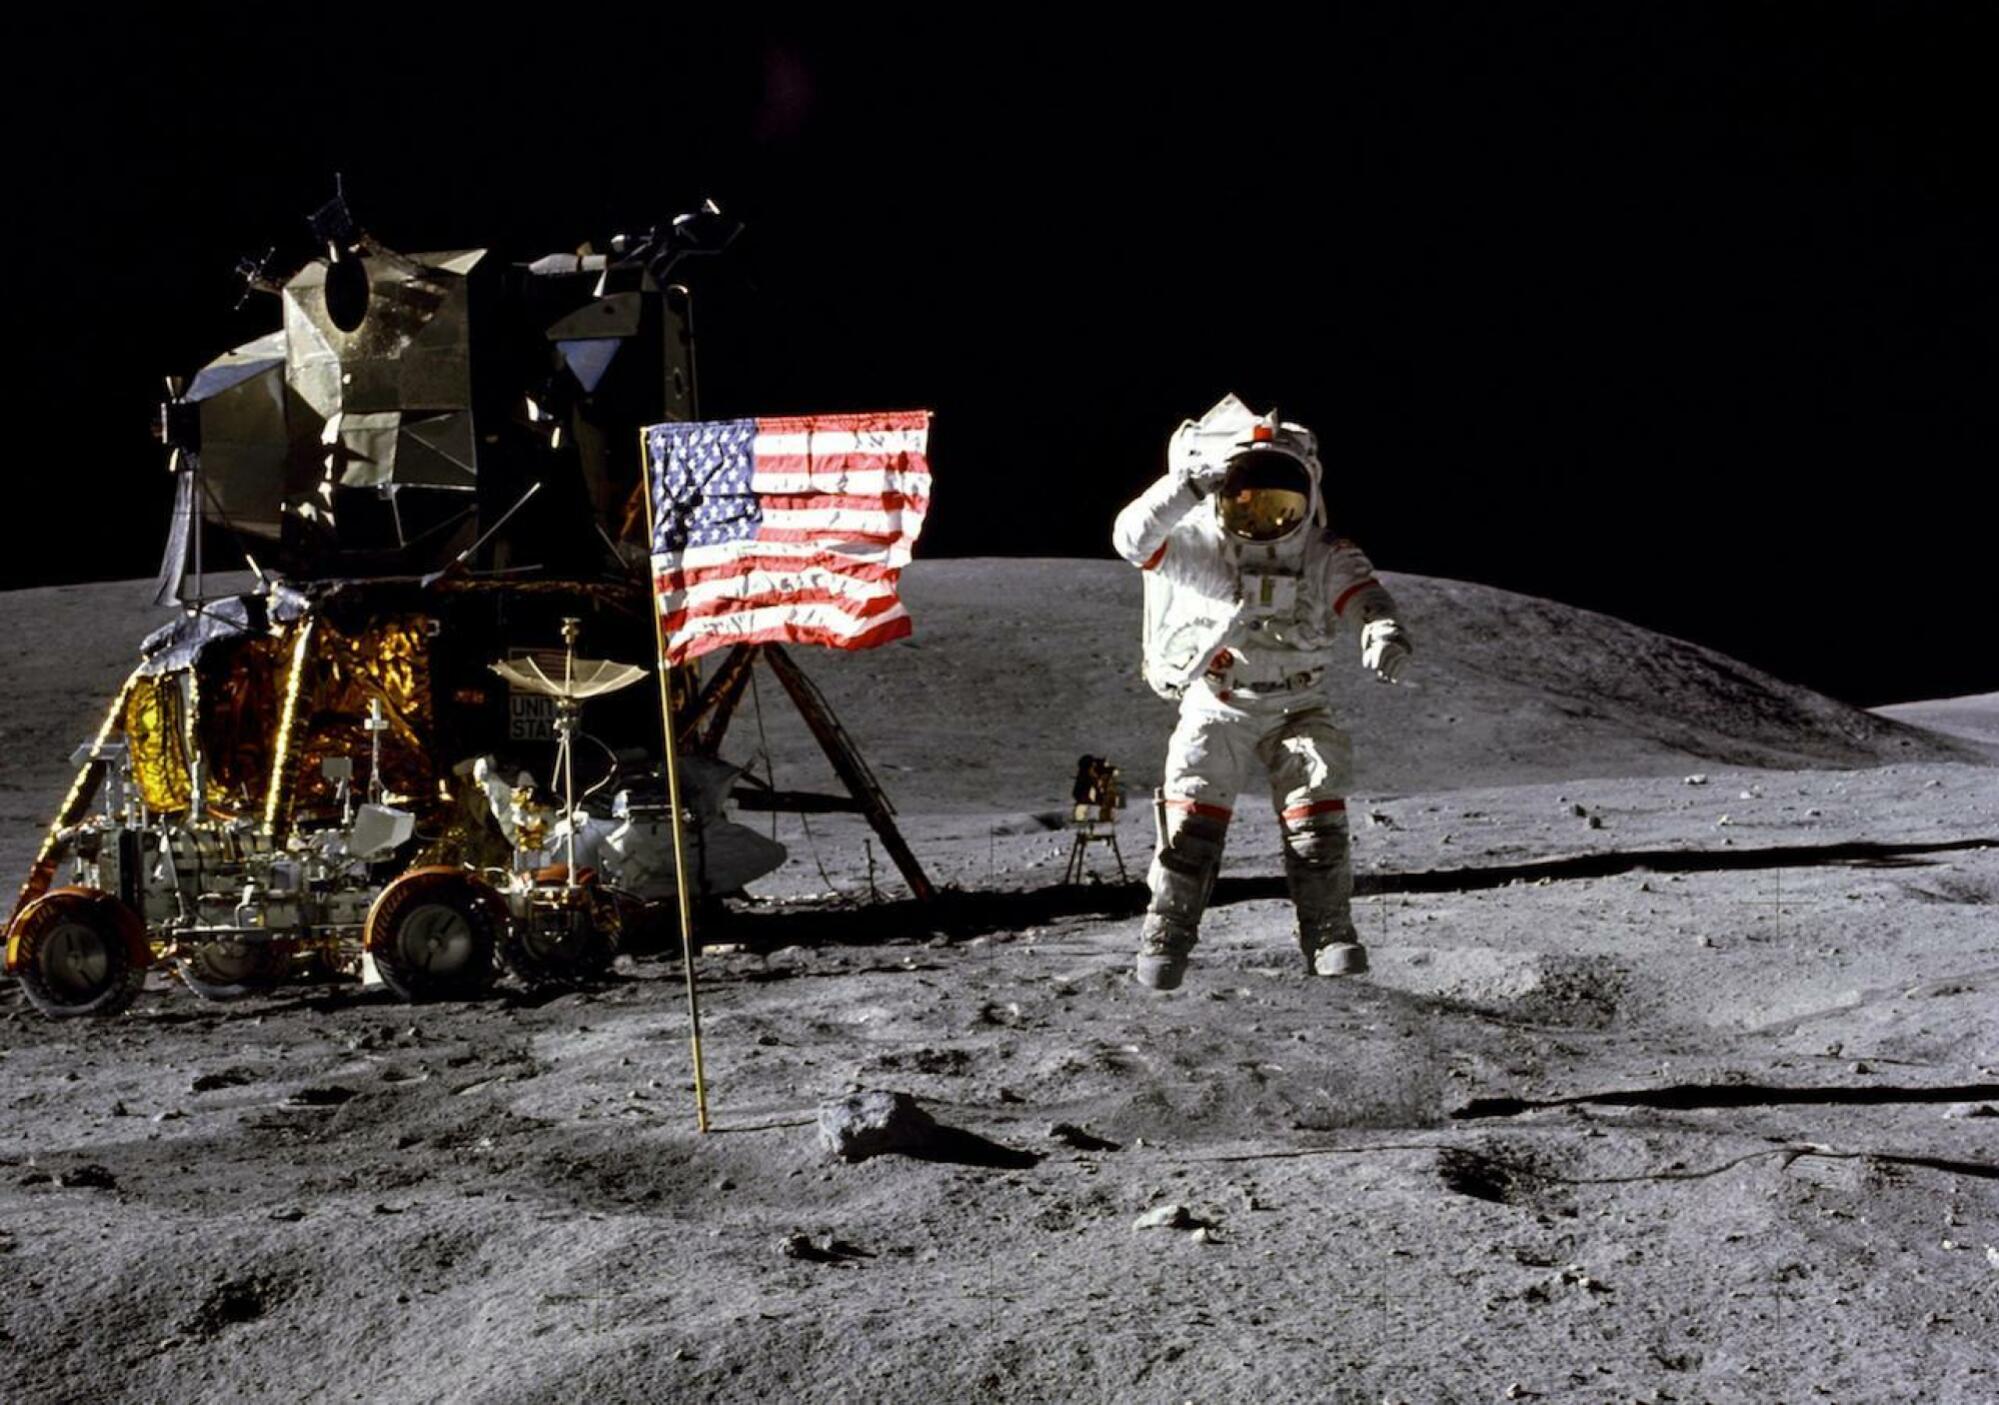 NASA Astronaut John W. Young leaping on the moon in 1972.